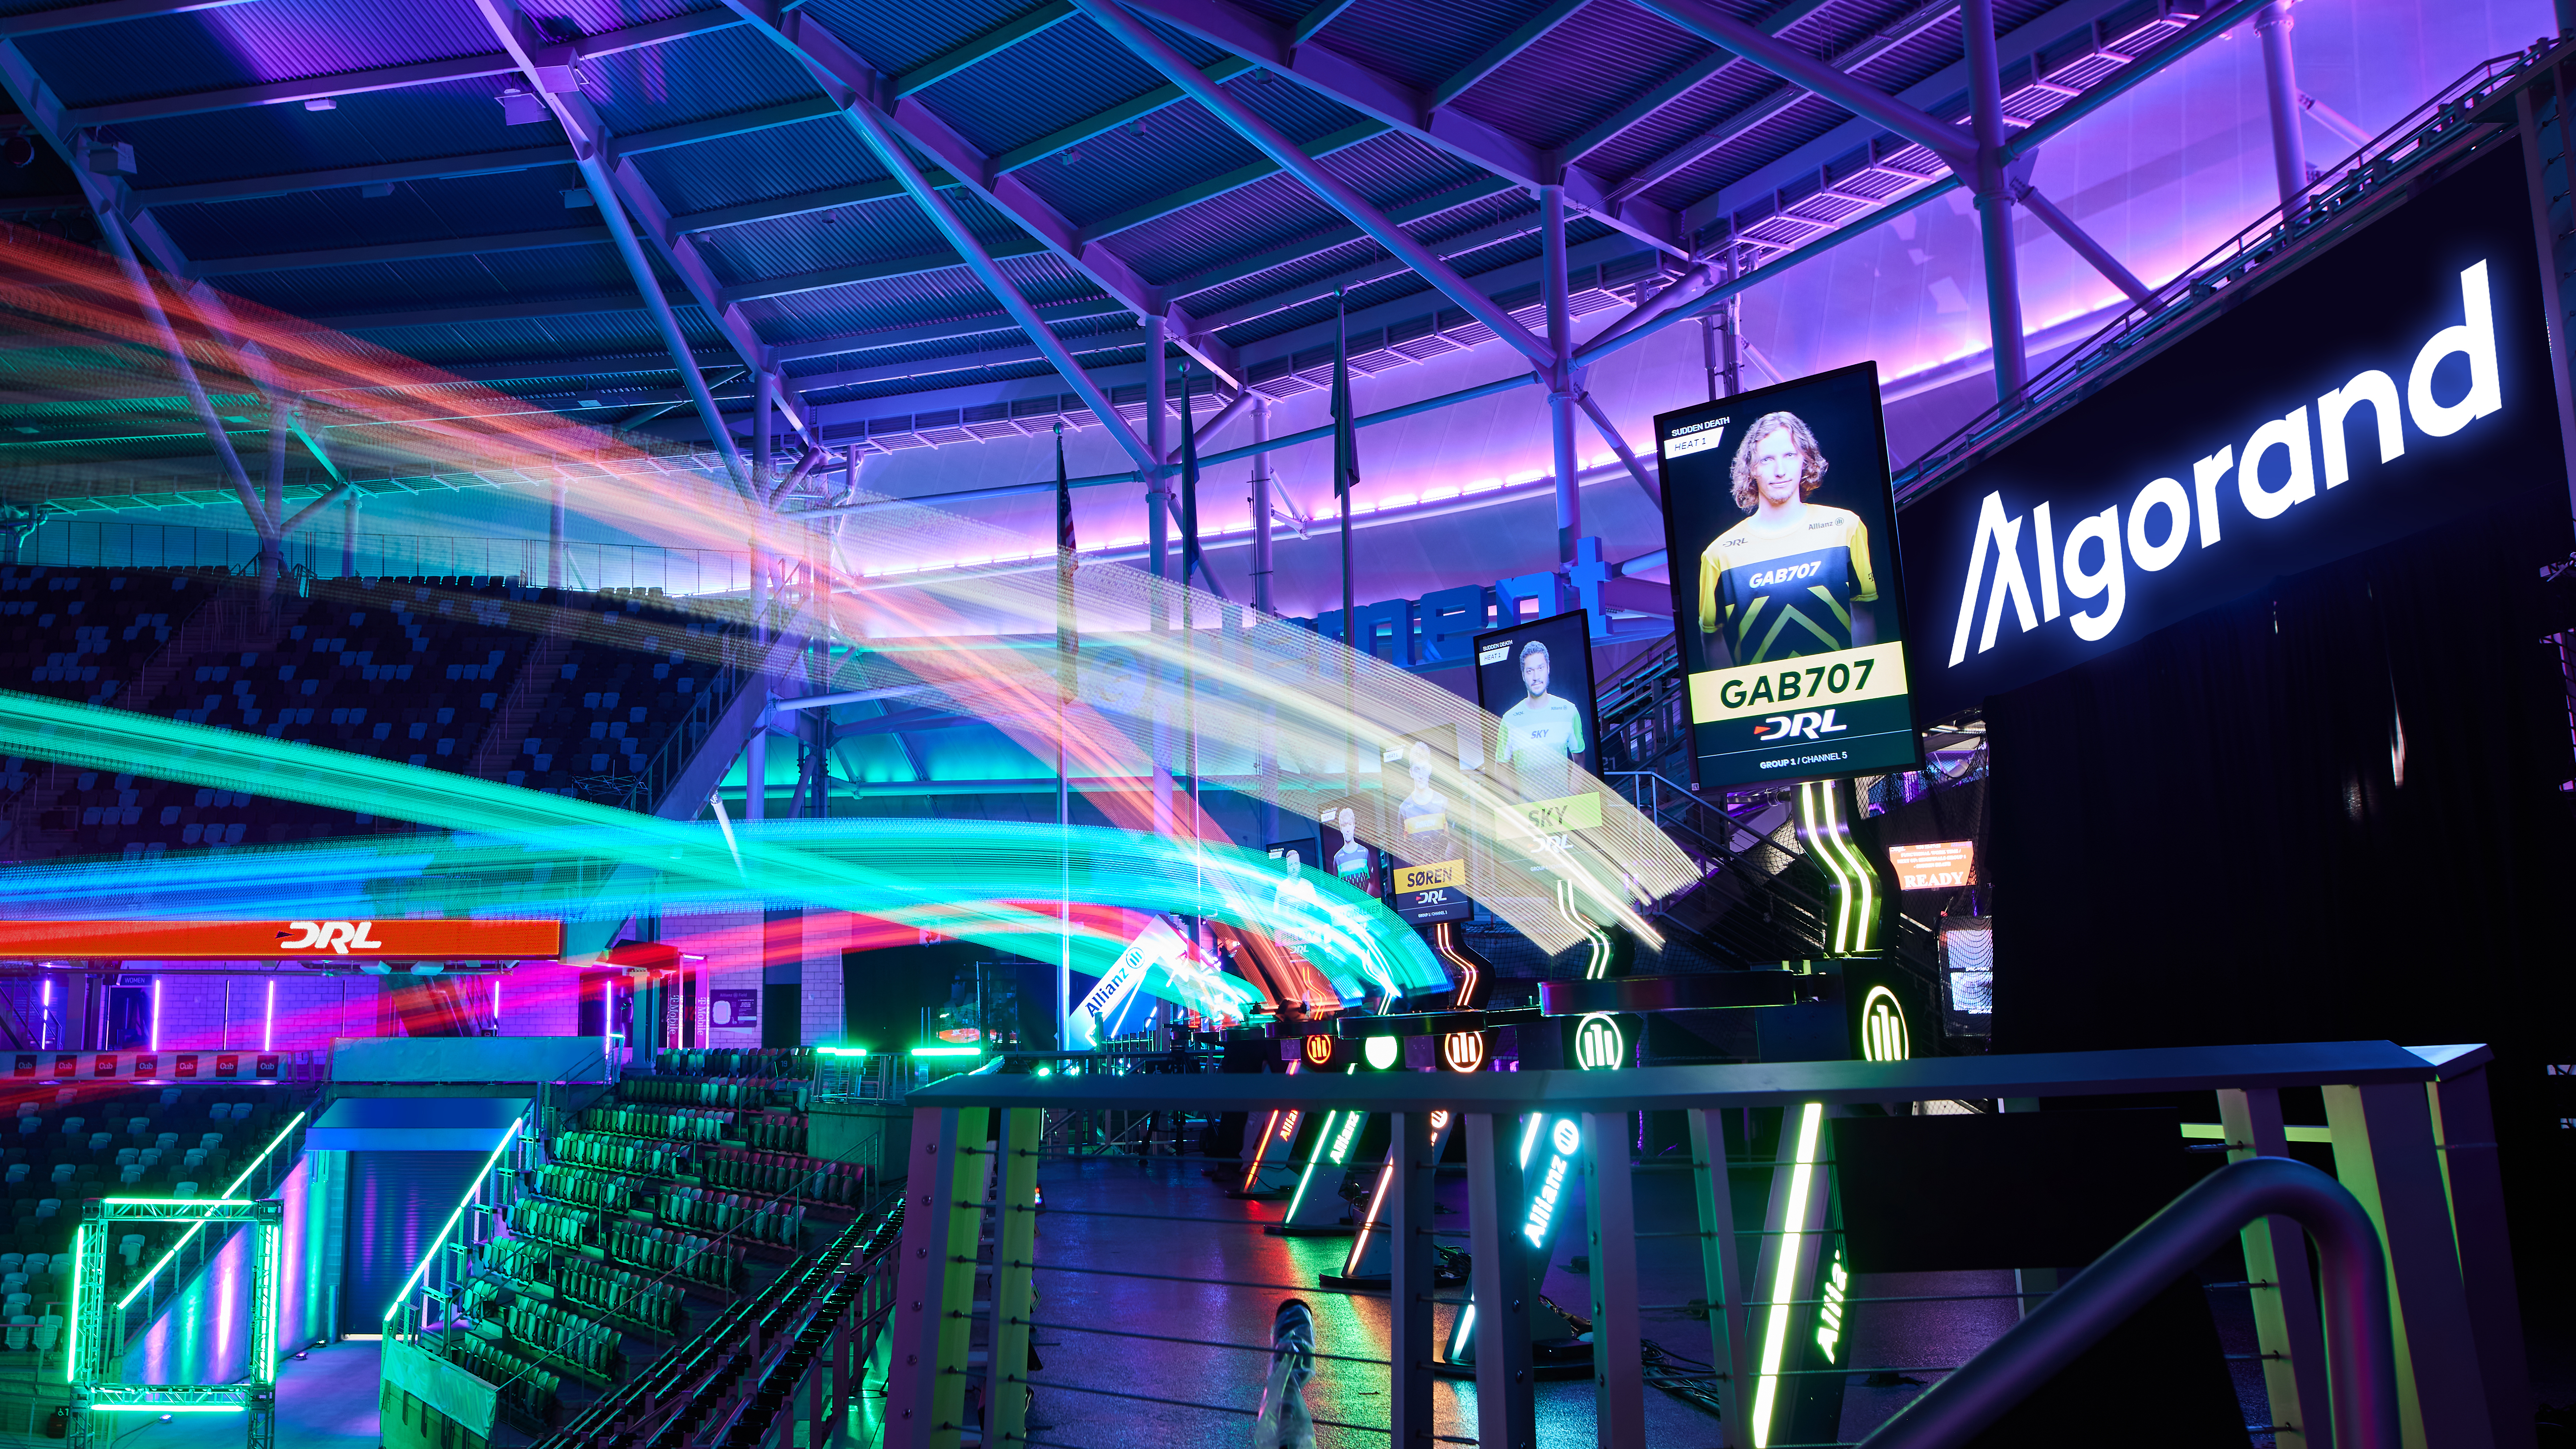 Drone Racing League Zooms Into Metaverse, Bringing ‘Play to Earn’ to Algorand